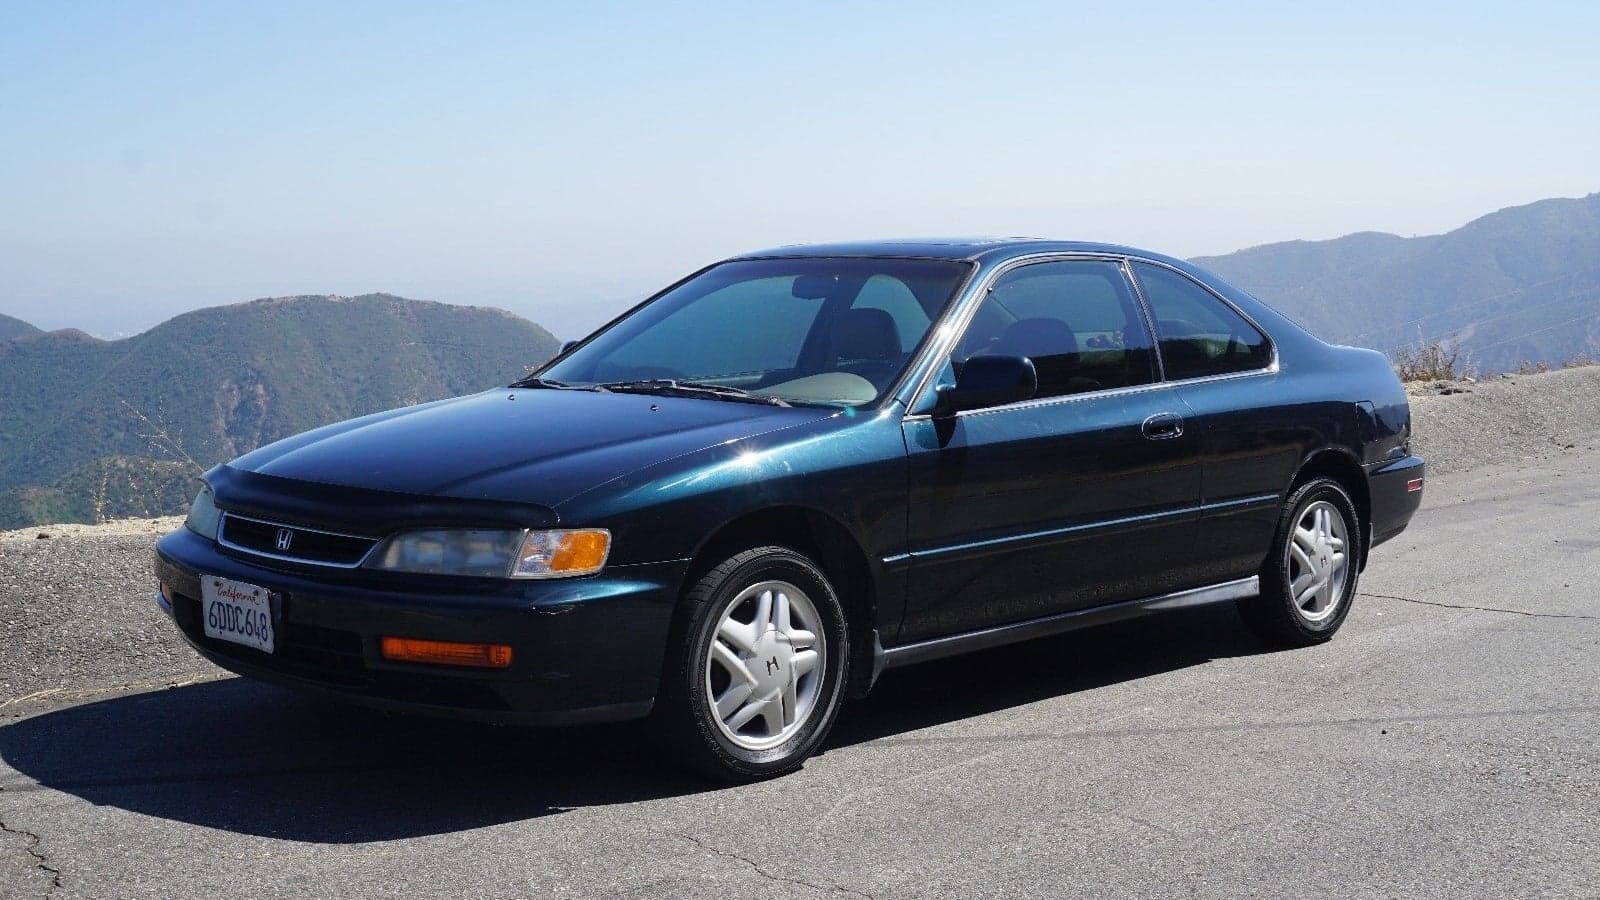 CarMax Is Offering $20,000 for a 1996 Honda Accord